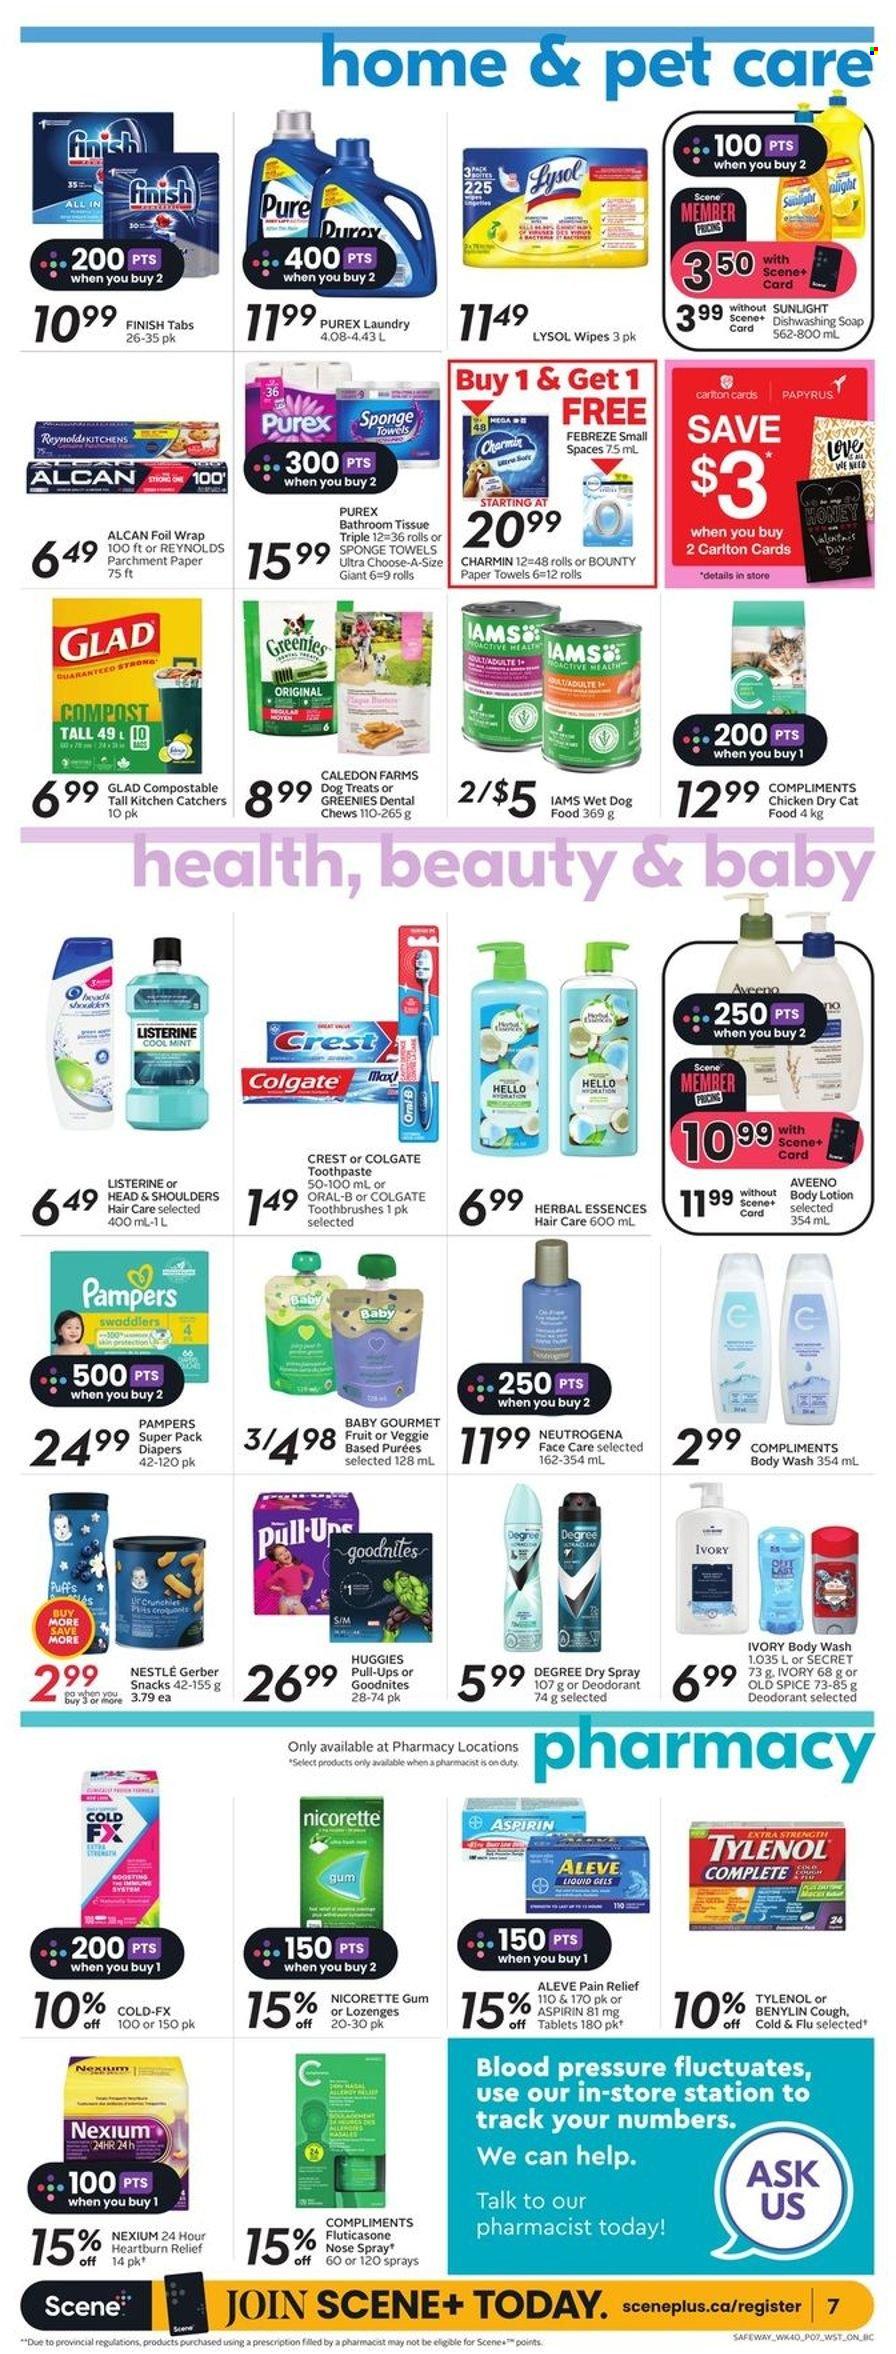 thumbnail - Safeway Flyer - February 02, 2023 - February 08, 2023 - Sales products - puffs, snack, Bounty, chewing gum, Gerber, spice, wipes, Pampers, nappies, Aveeno, bath tissue, kitchen towels, paper towels, Charmin, Febreze, Lysol, Sunlight, Purex, body wash, soap, toothpaste, Crest, Head & Shoulders, Herbal Essences, body lotion, anti-perspirant, animal food, cat food, dog food, wet dog food, Greenies, dry cat food, Iams, pain relief, Aleve, Cold & Flu, Nicorette, Tylenol, Nexium, Nicorette Gum, aspirin, Benylin, Colgate, Listerine, Nestlé, Neutrogena, Huggies, Old Spice, Oral-B, deodorant. Page 8.